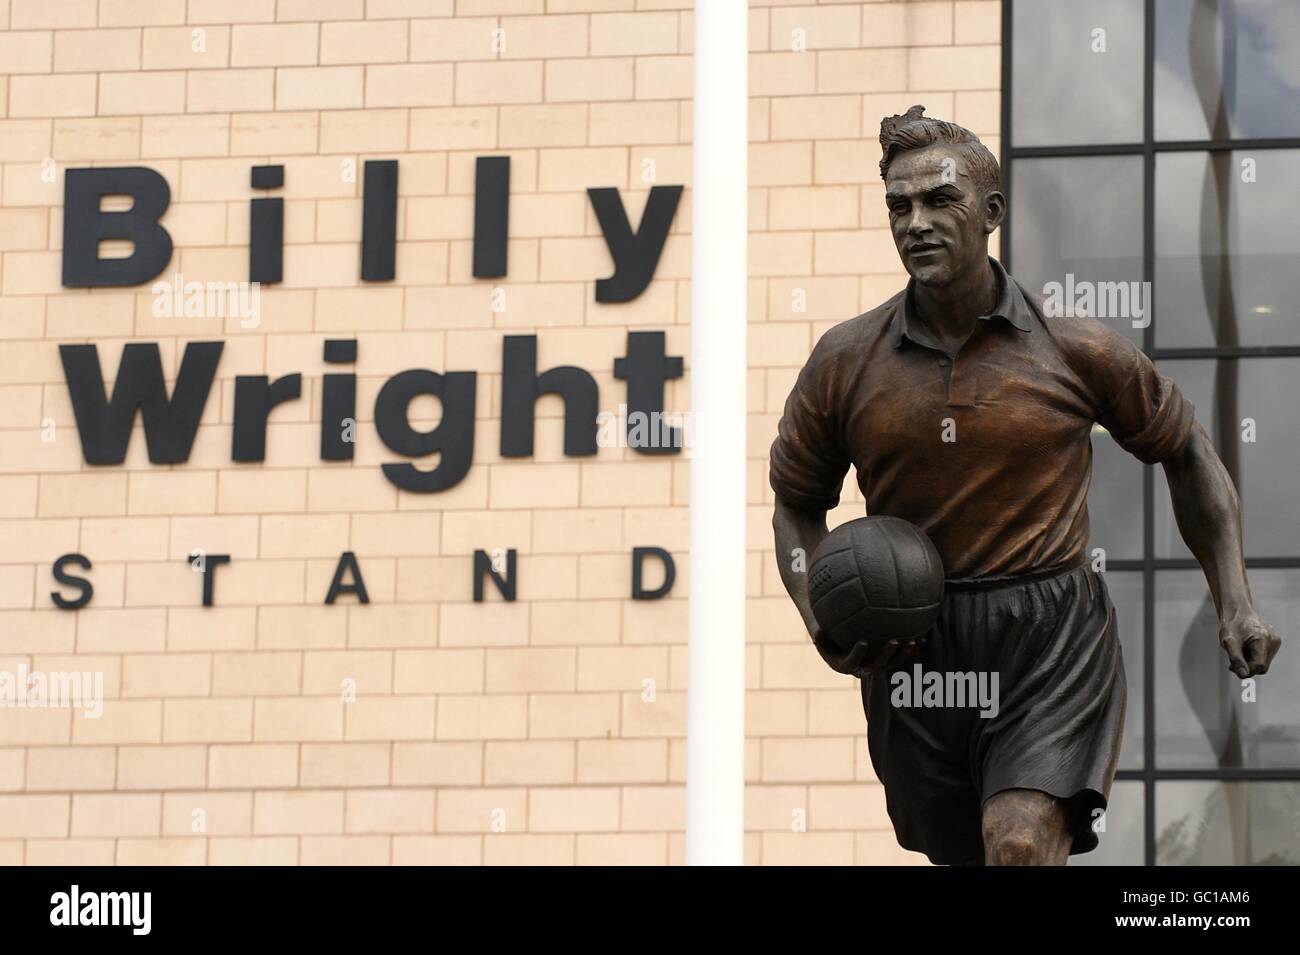 Soccer - Barclays Premier League - Wolverhampton Wanderers v West Ham United - Molineux. A statue of Wolves legend Billy Wright stands outside the stand named after him at Molineux Stock Photo